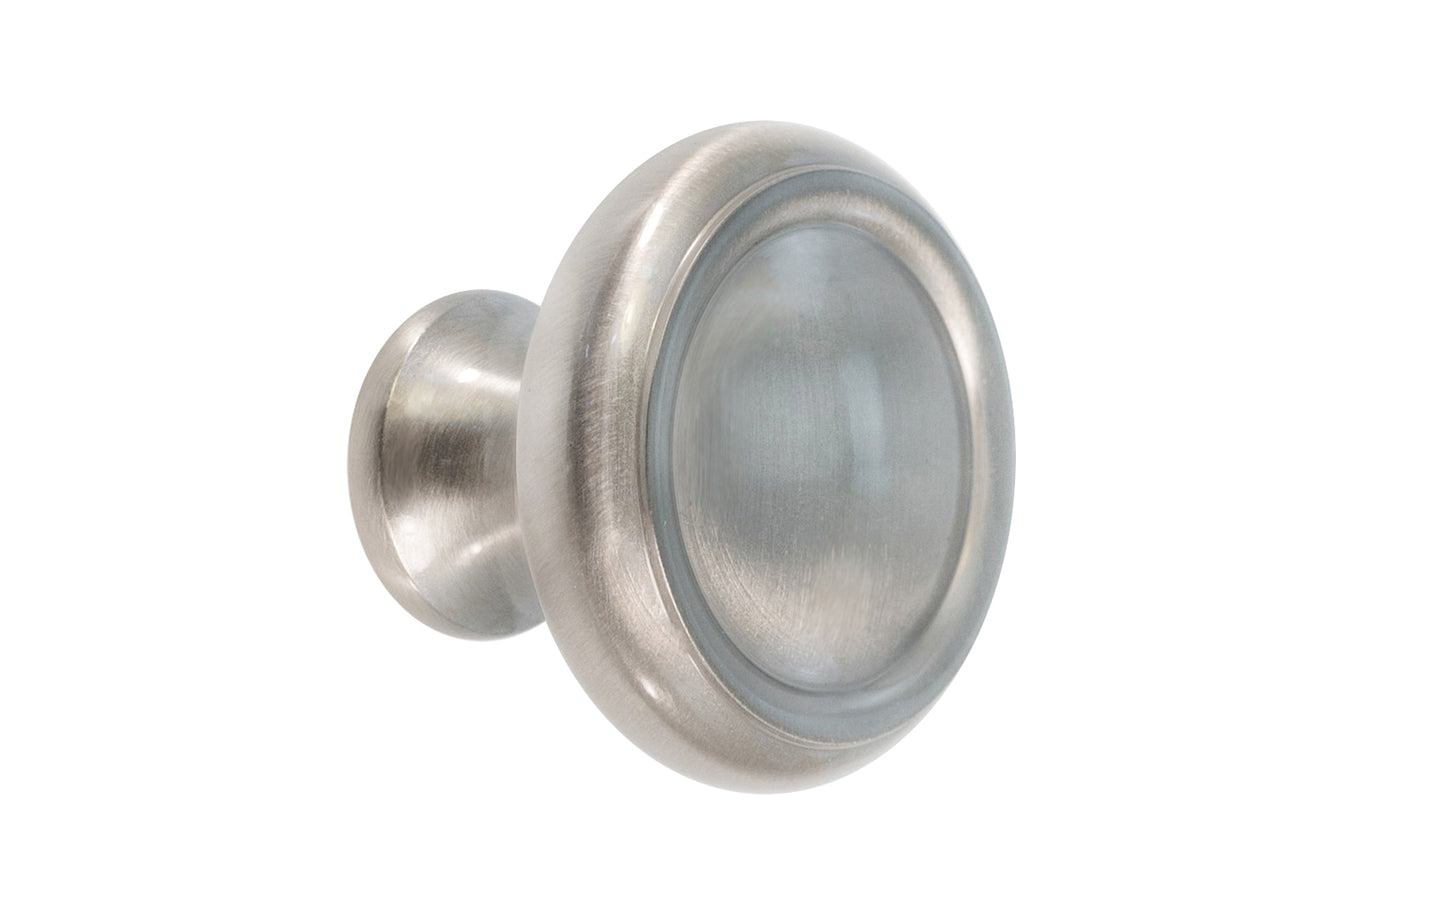 Solid Brass Dome-Style Cabinet Knob ~ 1-1/4" Diameter. Made of solid brass material. The knob is designed in the Mid-Century style of hardware, but will fit in with any time period up to the current modern styles. Great for kitchens, bathrooms, on furniture, cabinets, drawers, small doors, cabinet doors. Dome knob. Brushed Nickel Finish